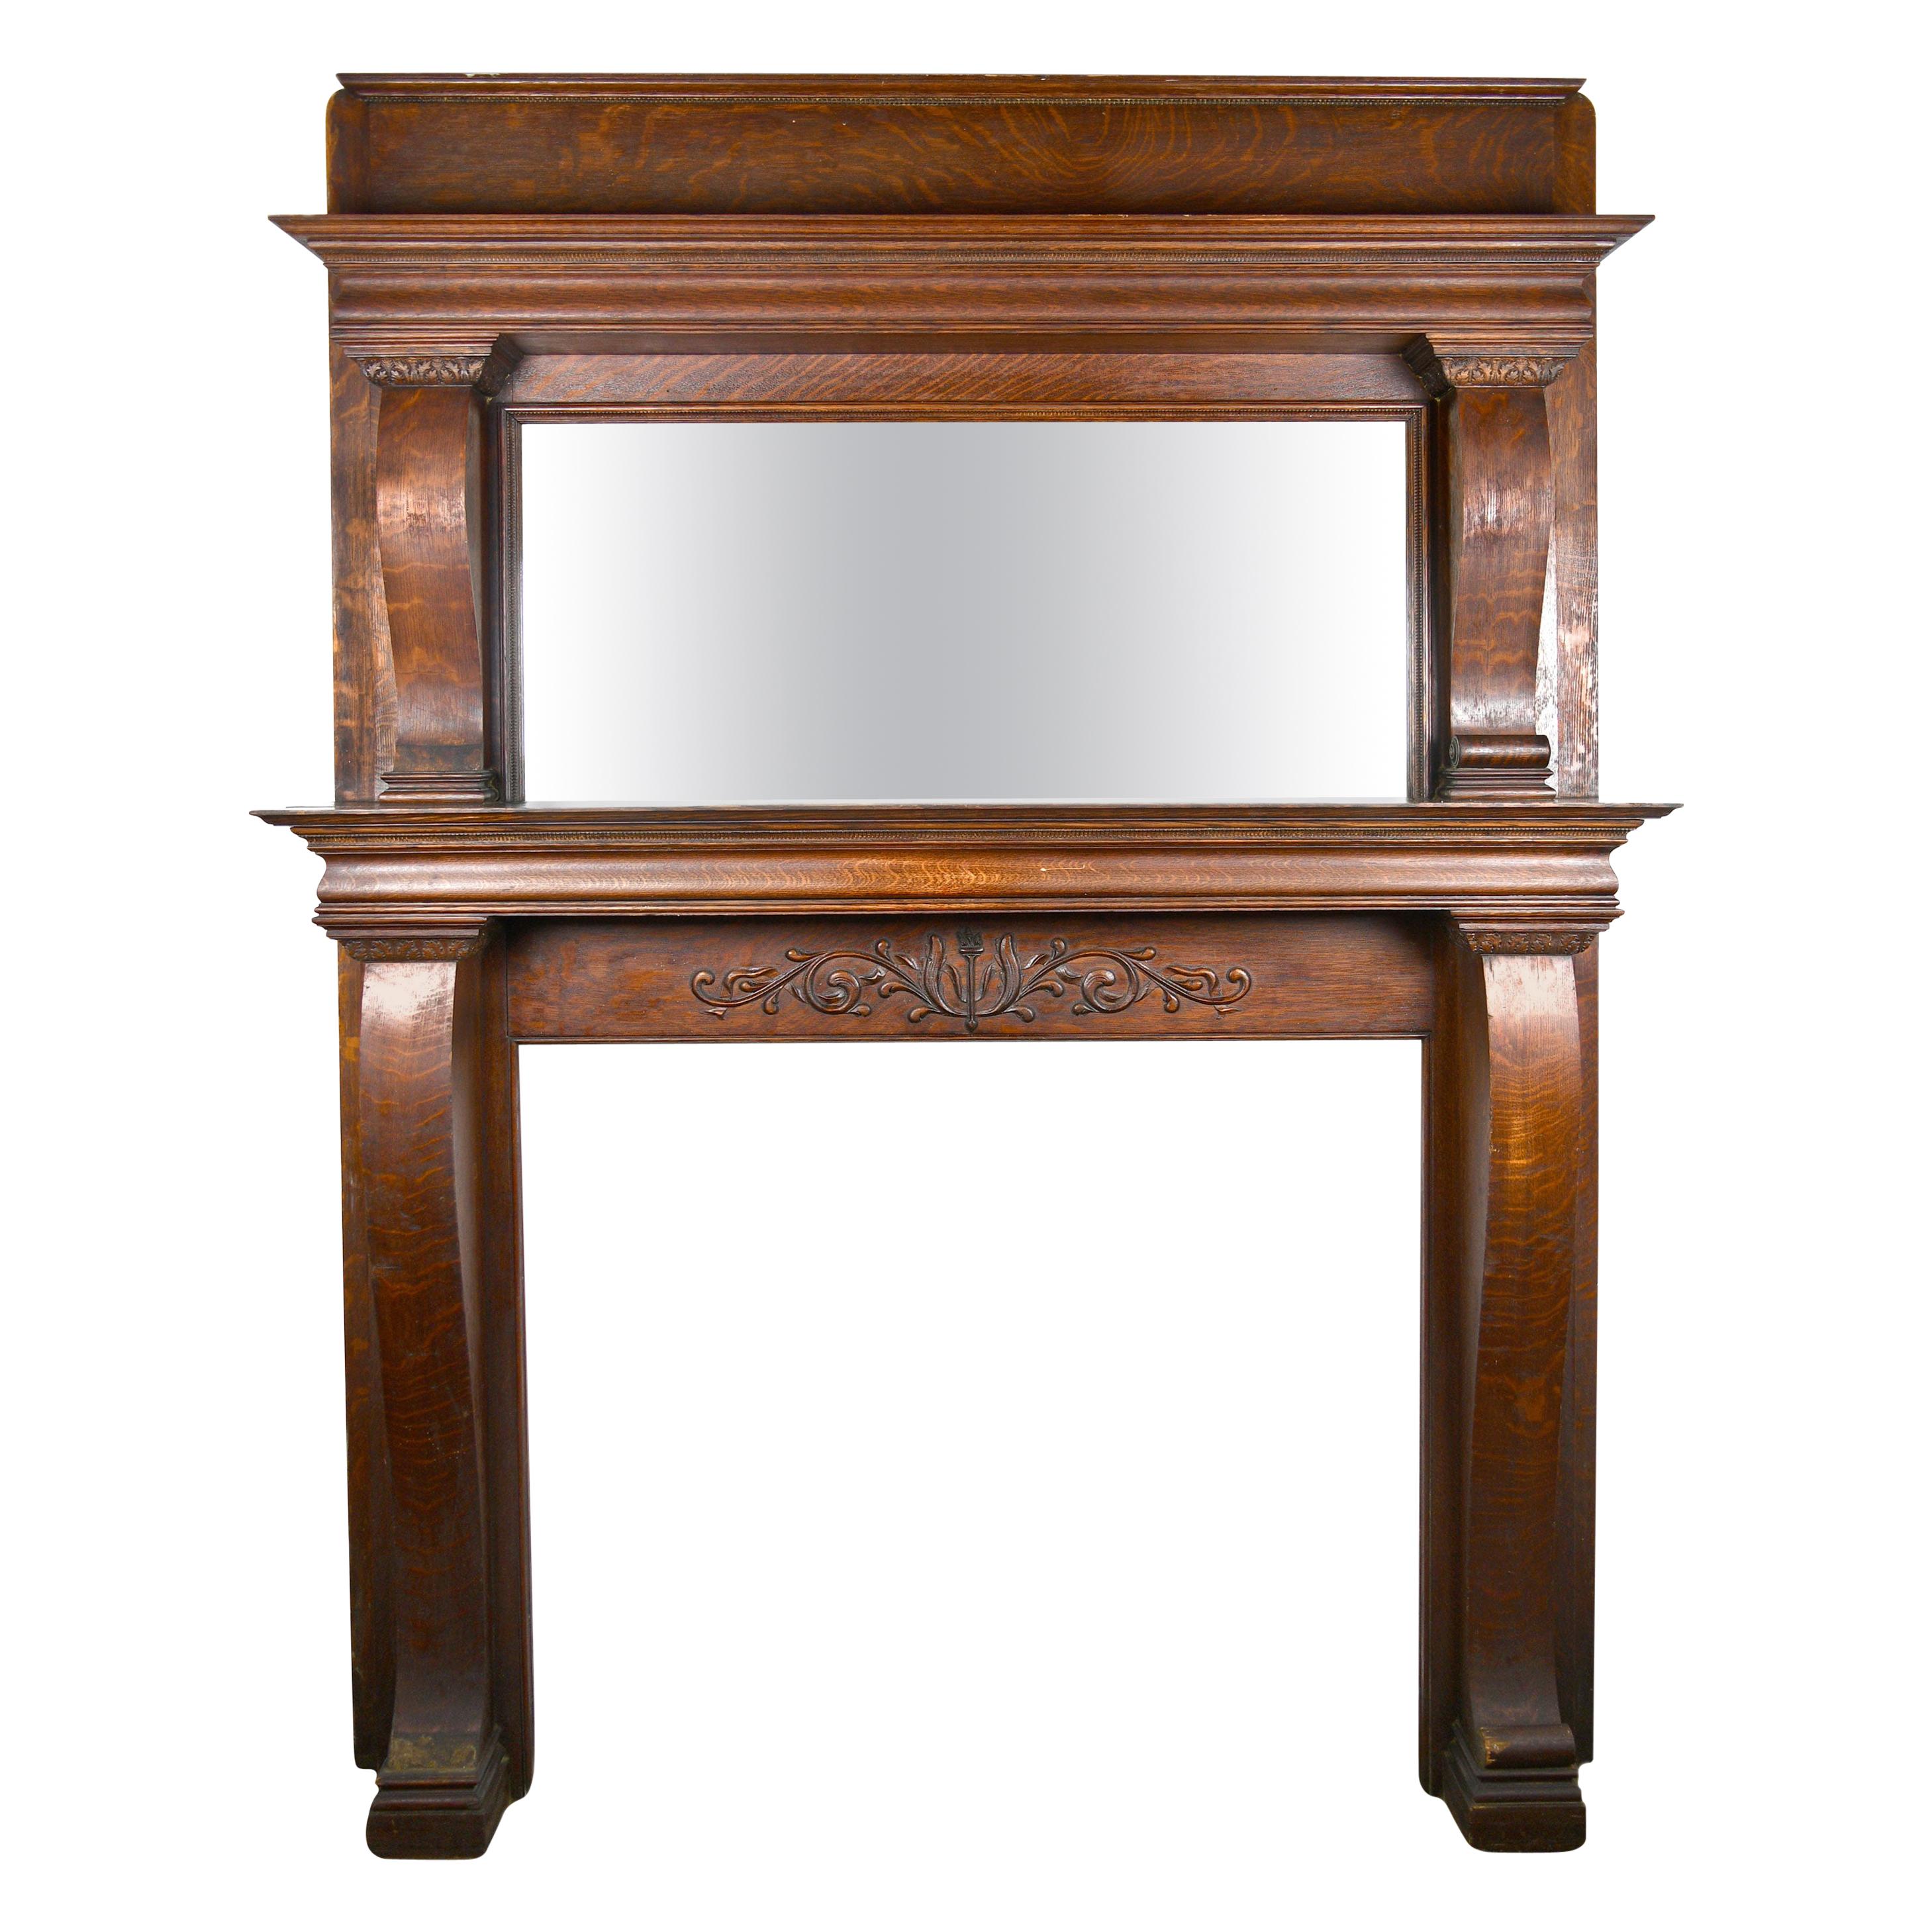 Quarter Sawn Oak fireplace Mantel with Curved Corbels